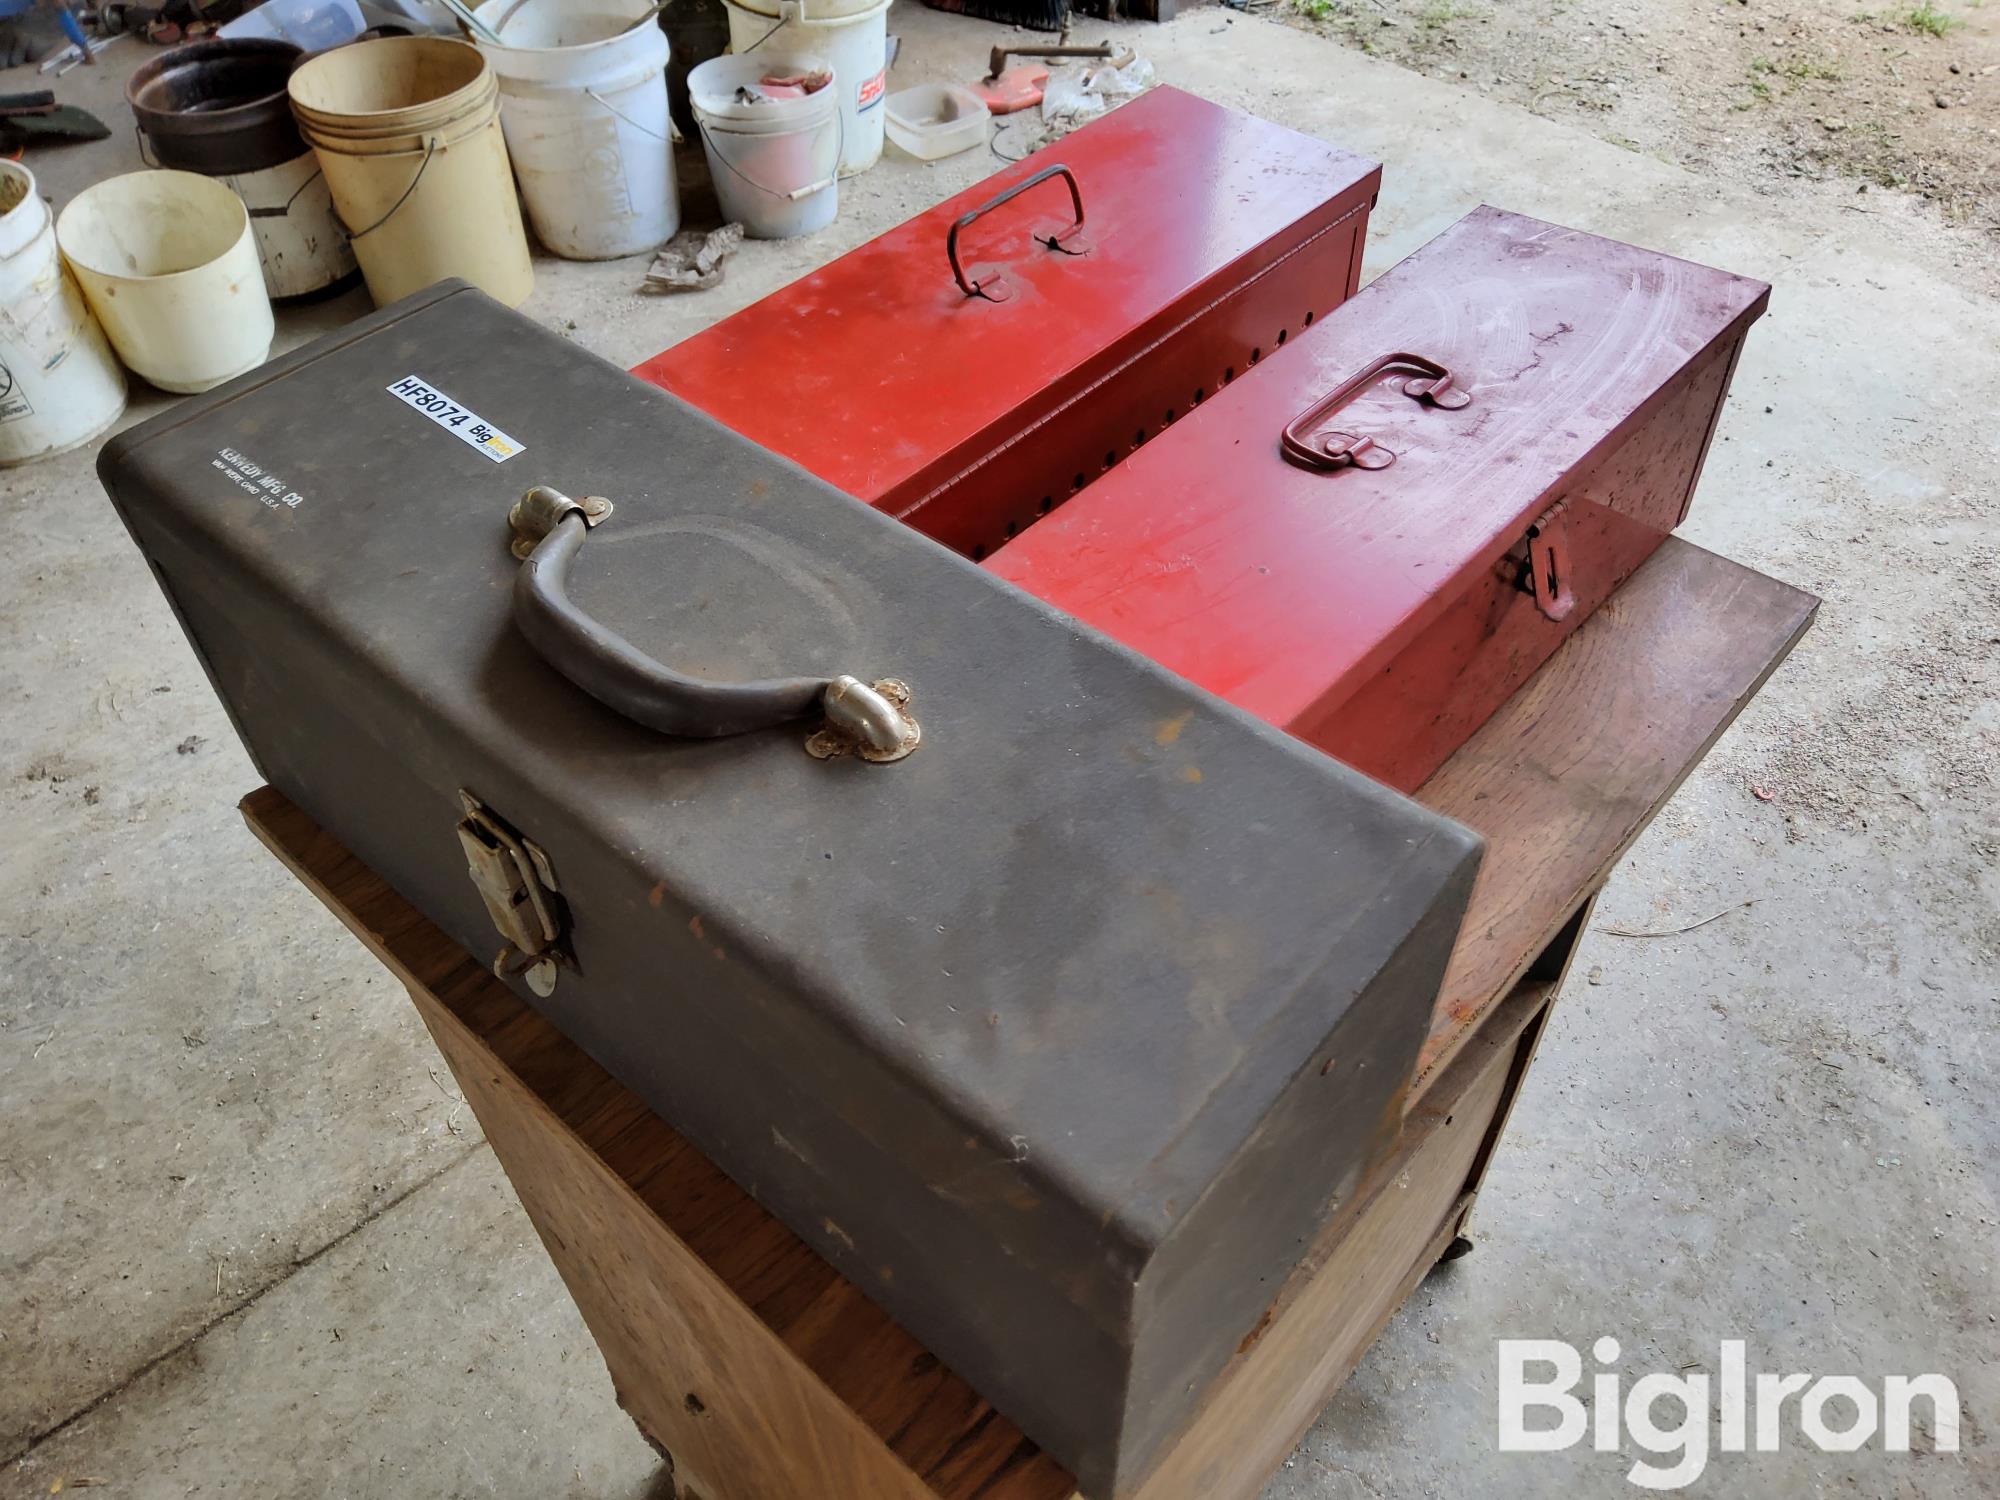 Kennedy Tool Box Auction